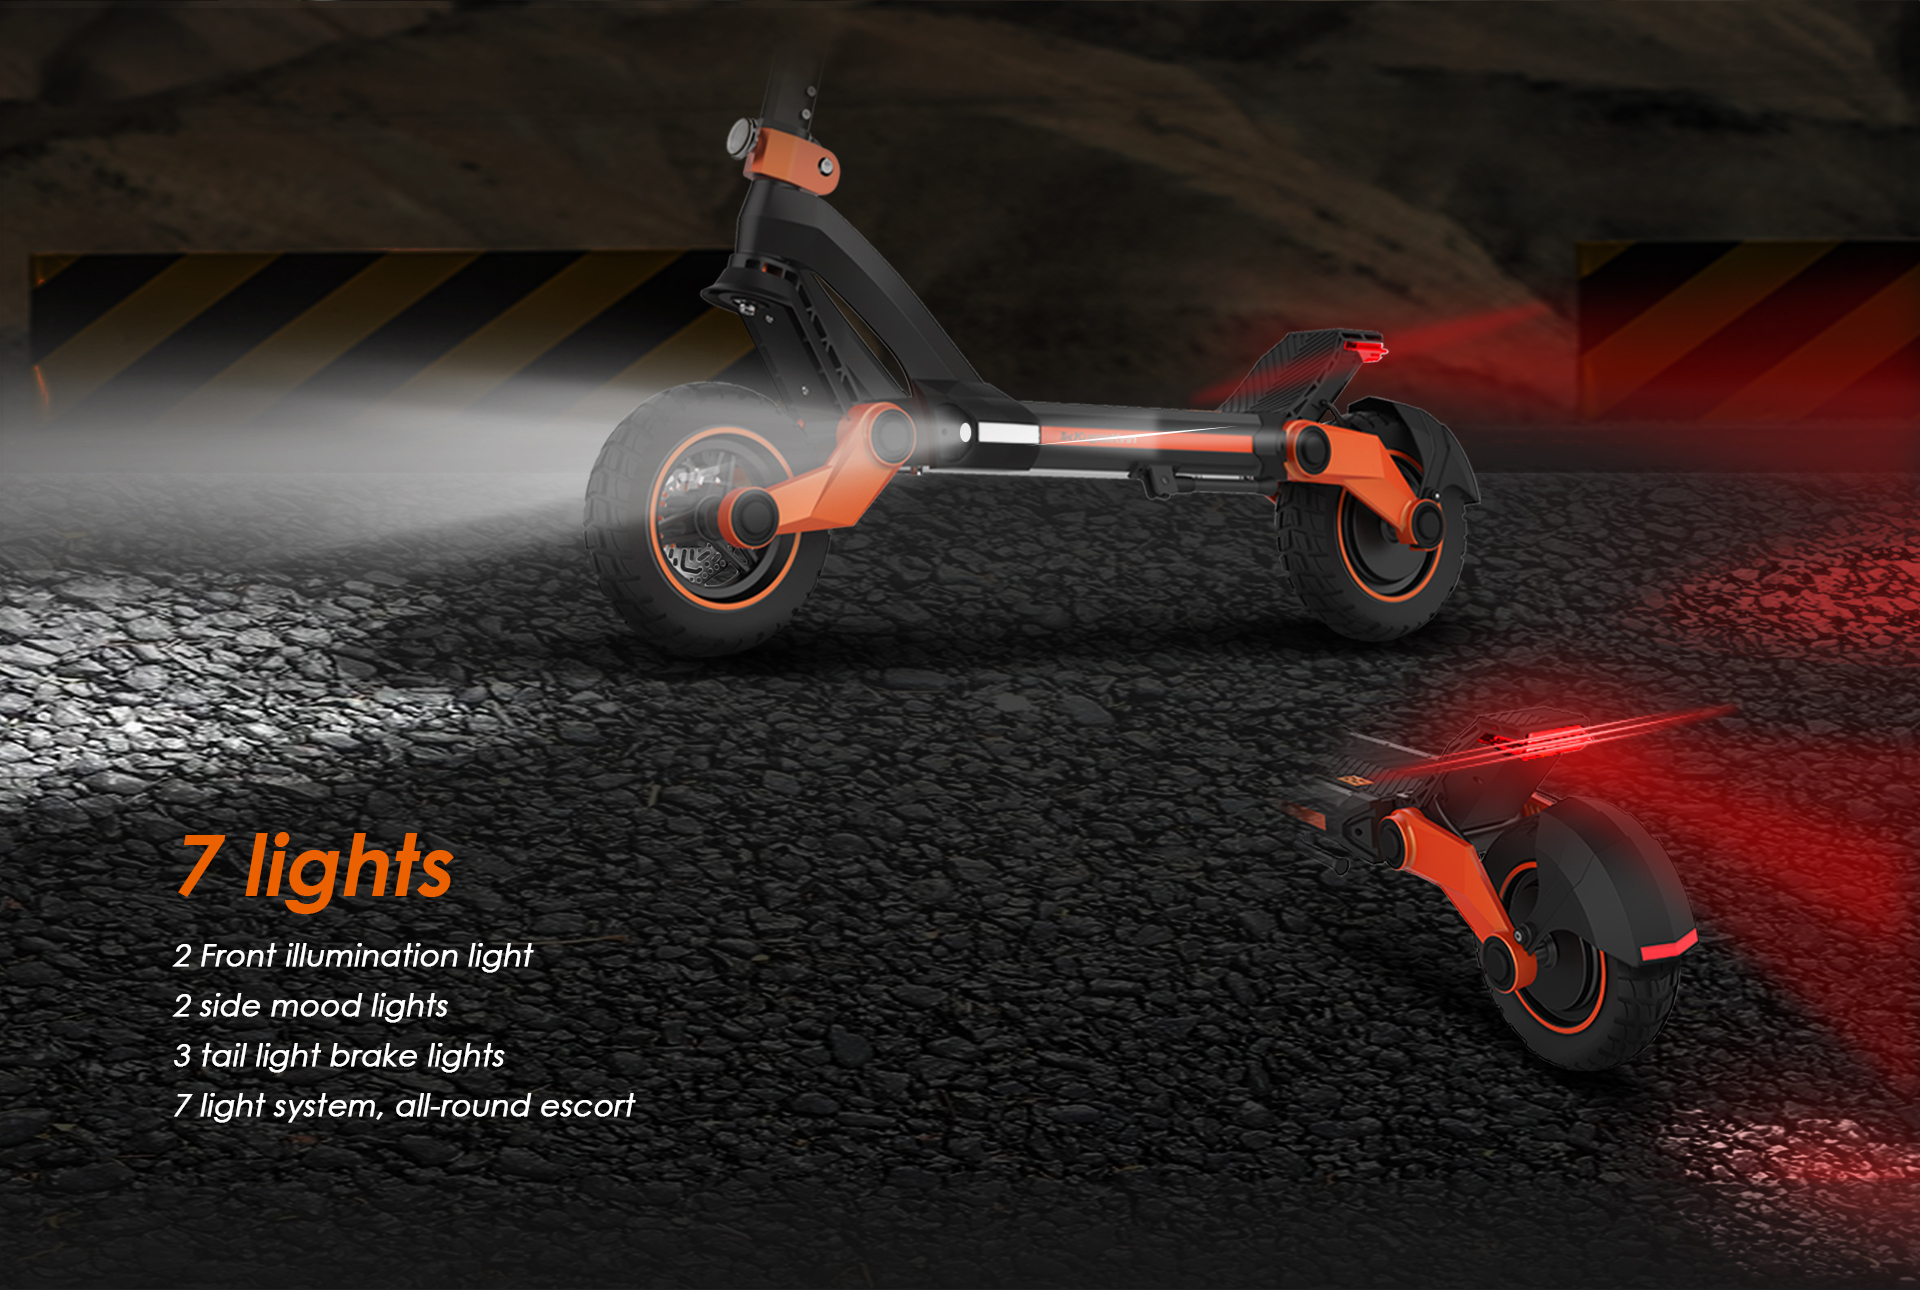 KUGOO KIRIN G3 Adventurers Electric Scooter 10.5 Inch 1200W Rear Motor 52V 18Ah Lithium battery Max Speed 50KM/H Touchable Display Control Panel TPU Suspension System IPX4 - Black